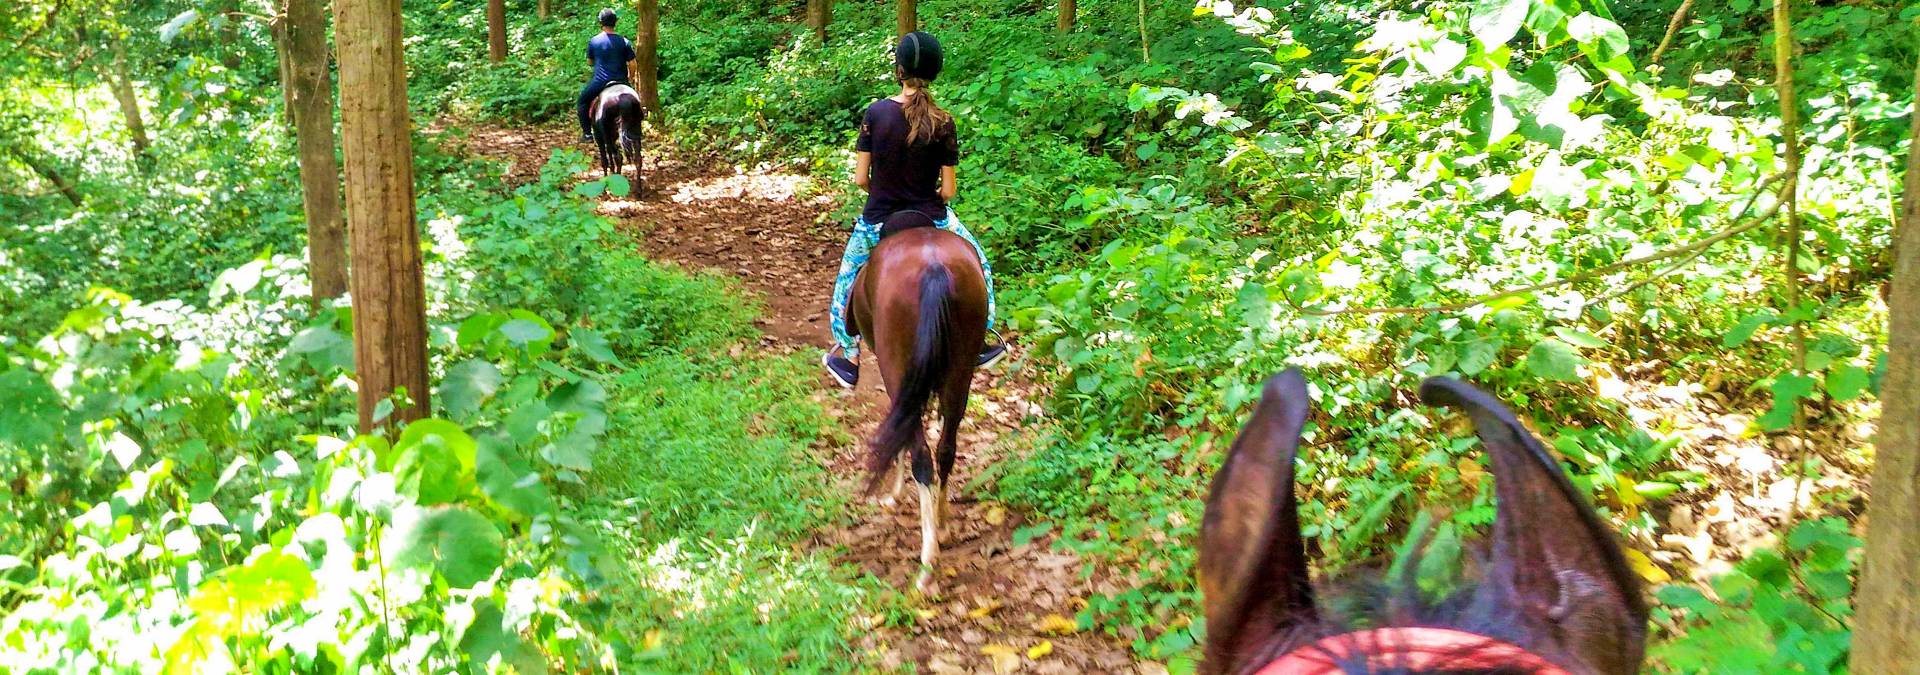 Learn Horse Riding without taking leave